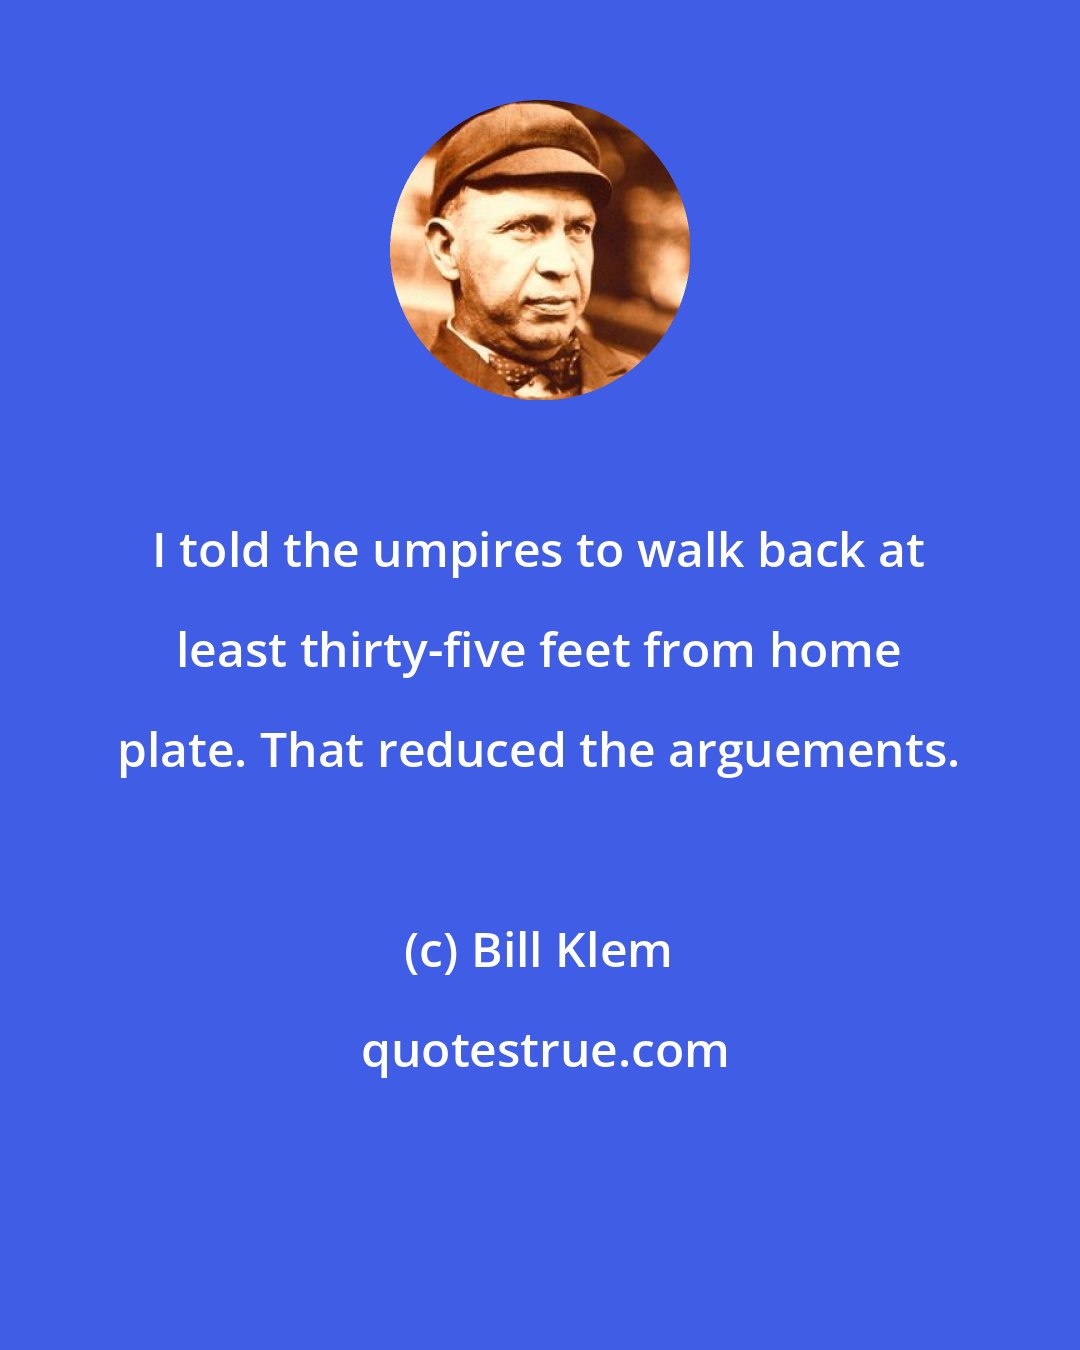 Bill Klem: I told the umpires to walk back at least thirty-five feet from home plate. That reduced the arguements.